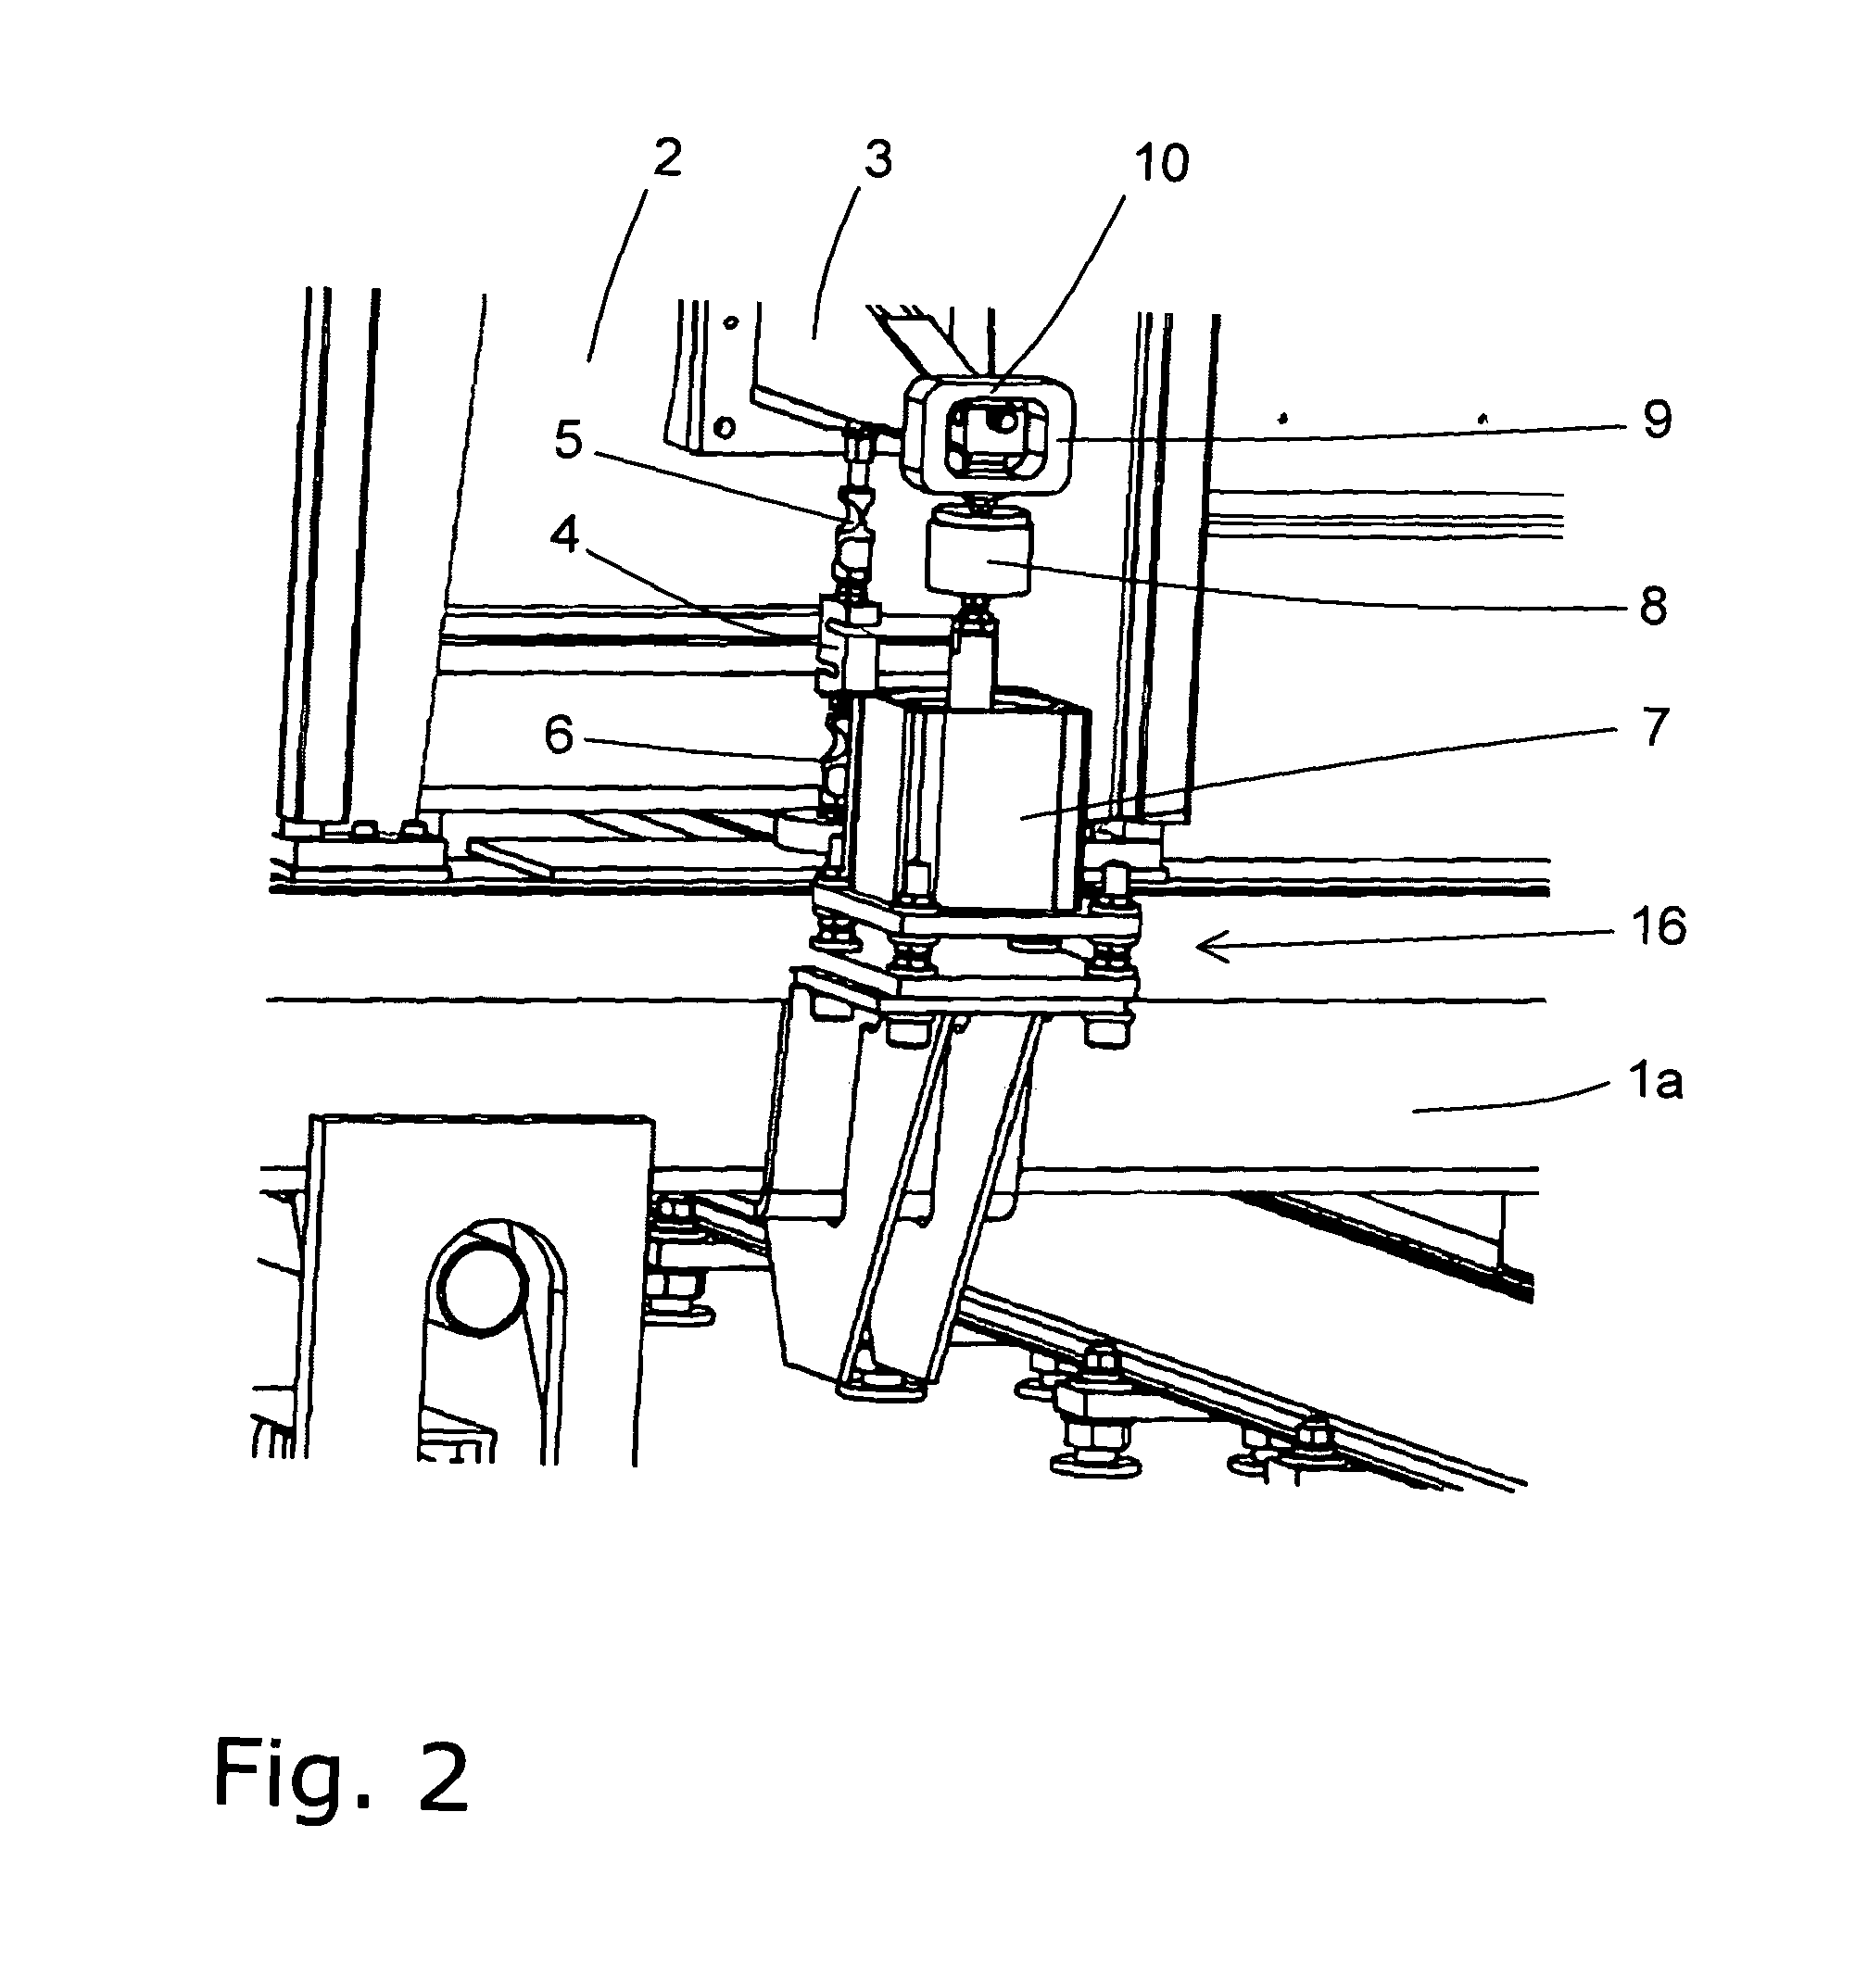 Test stand with an apparatus for calibrating a force-measuring device